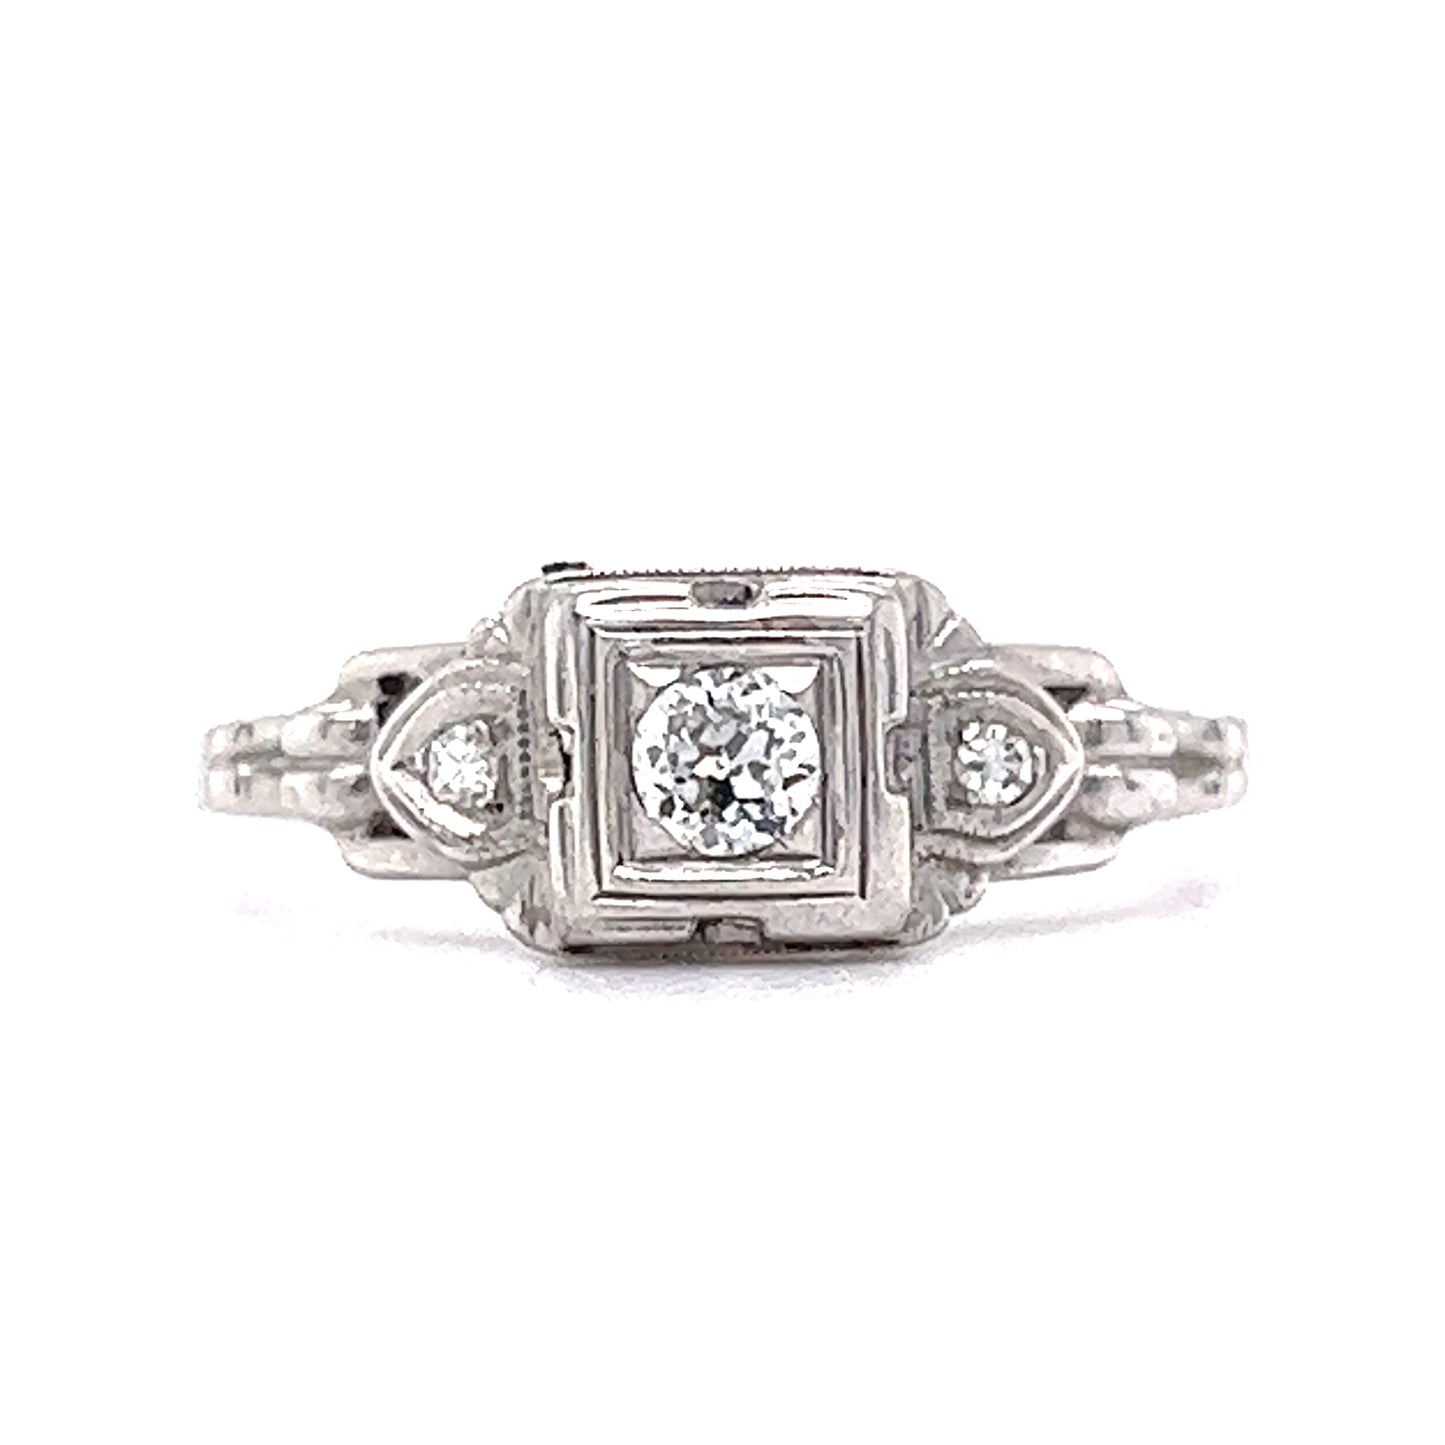 1930's Geometric Engagement Ring w/ .13 Diamond in White Gold